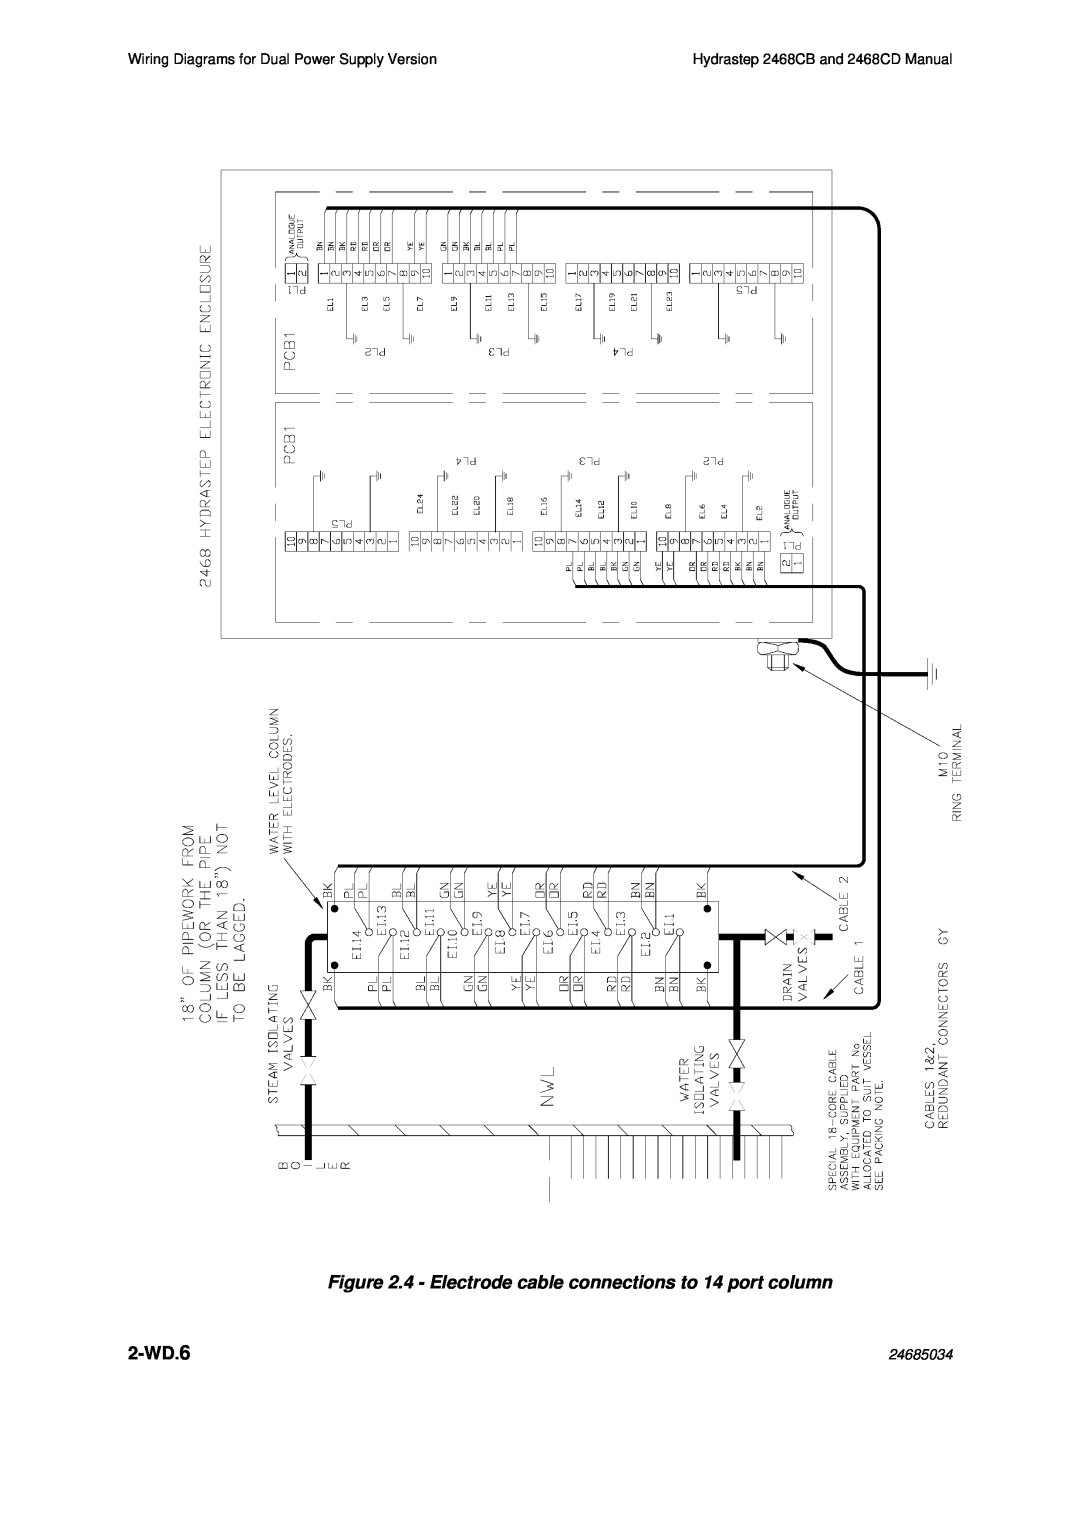 Emerson manual 2-WD.6, Wiring Diagrams for Dual Power Supply Version, Hydrastep 2468CB and 2468CD Manual, 24685034 